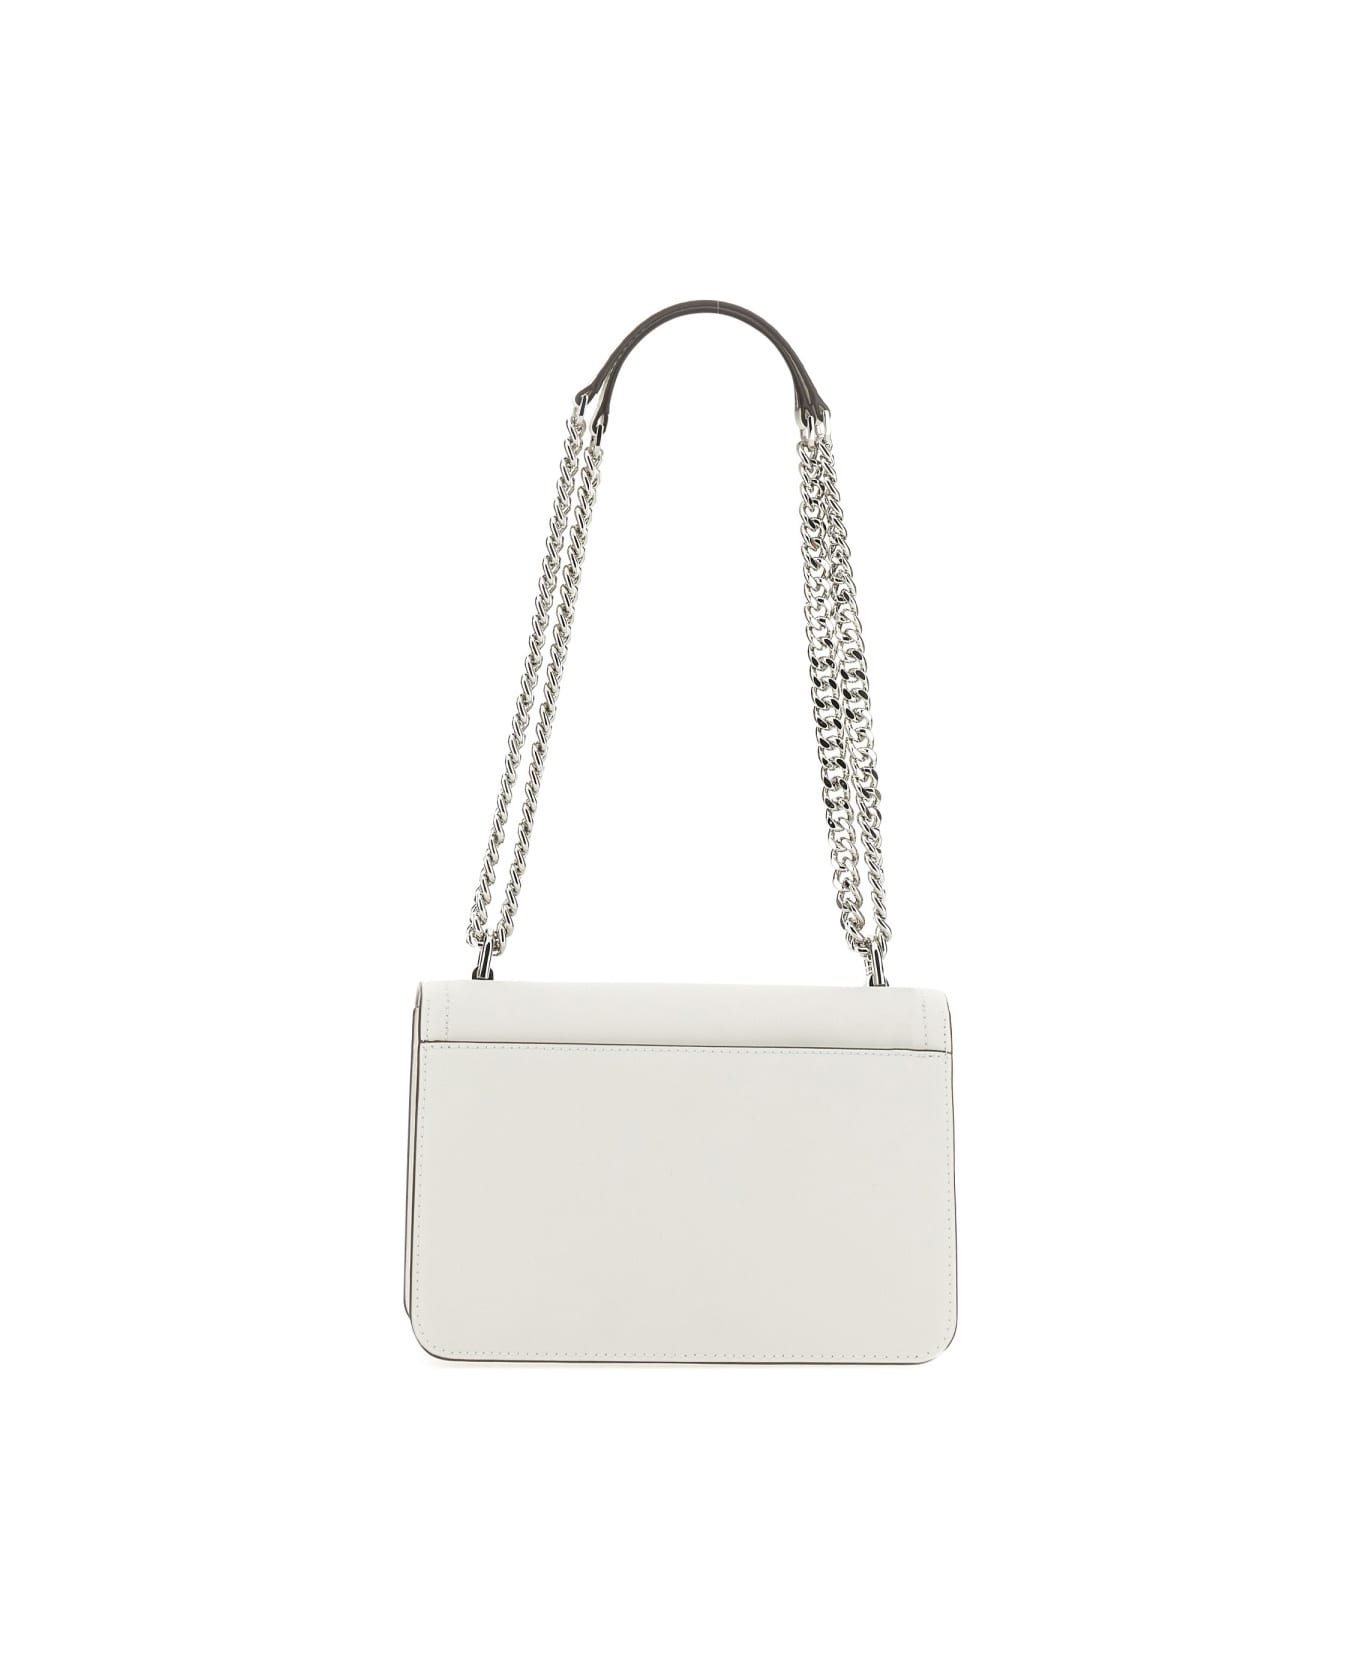 Michael Kors Heather Extra-small Shoulder Bag - WHITE